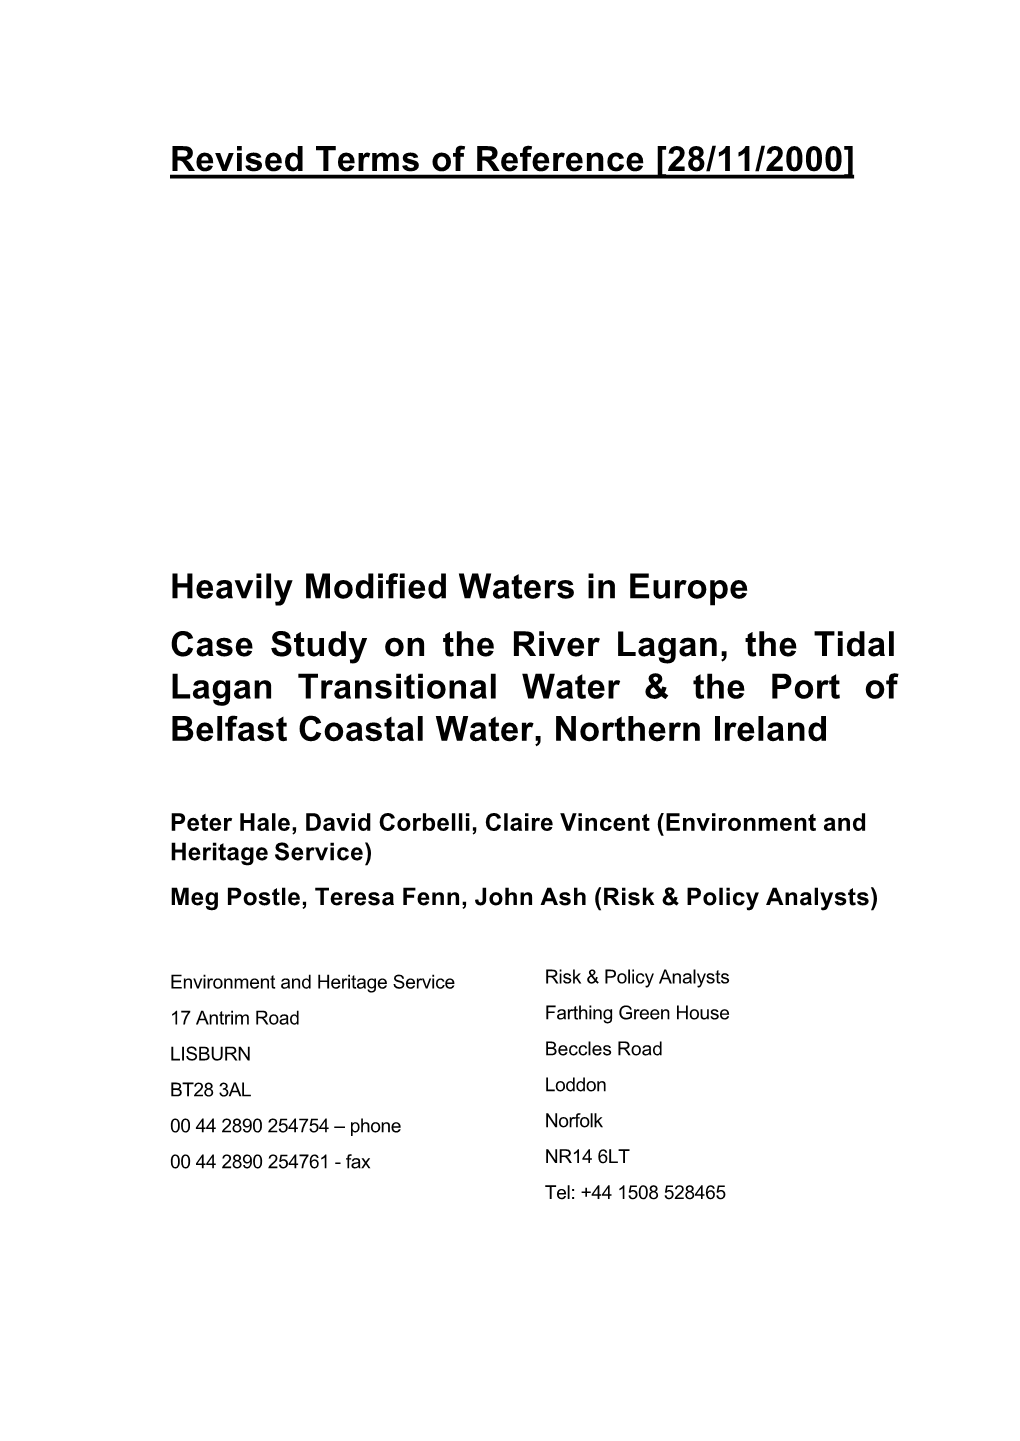 Water Framework Directive : Heavily Modified Water Bodies